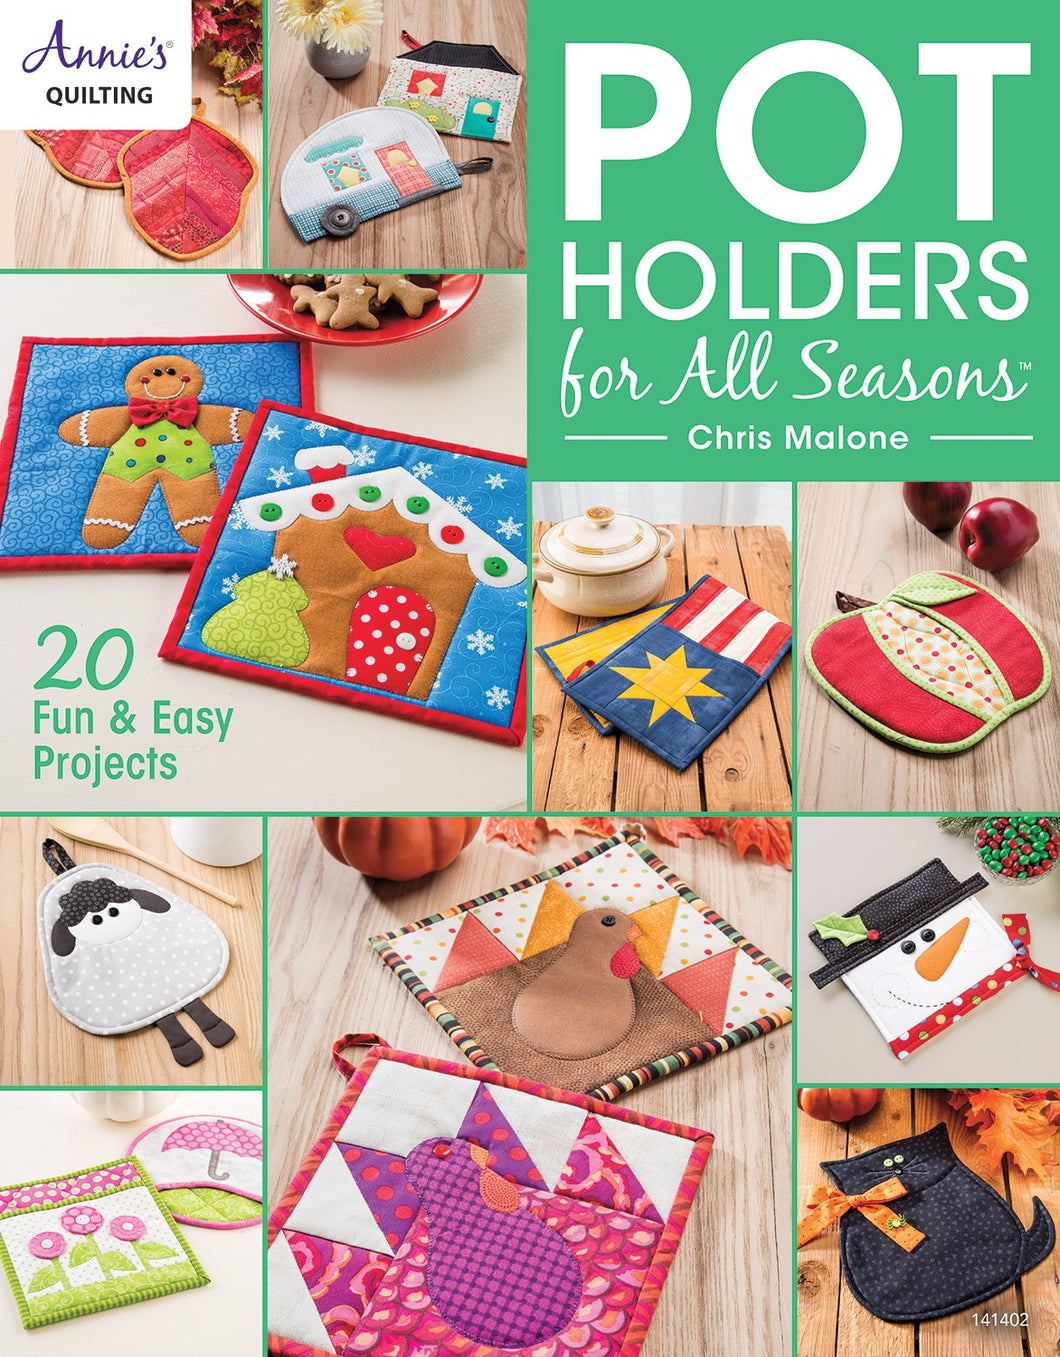 Pot Holders for All Seasons by Chris Malone from Annies